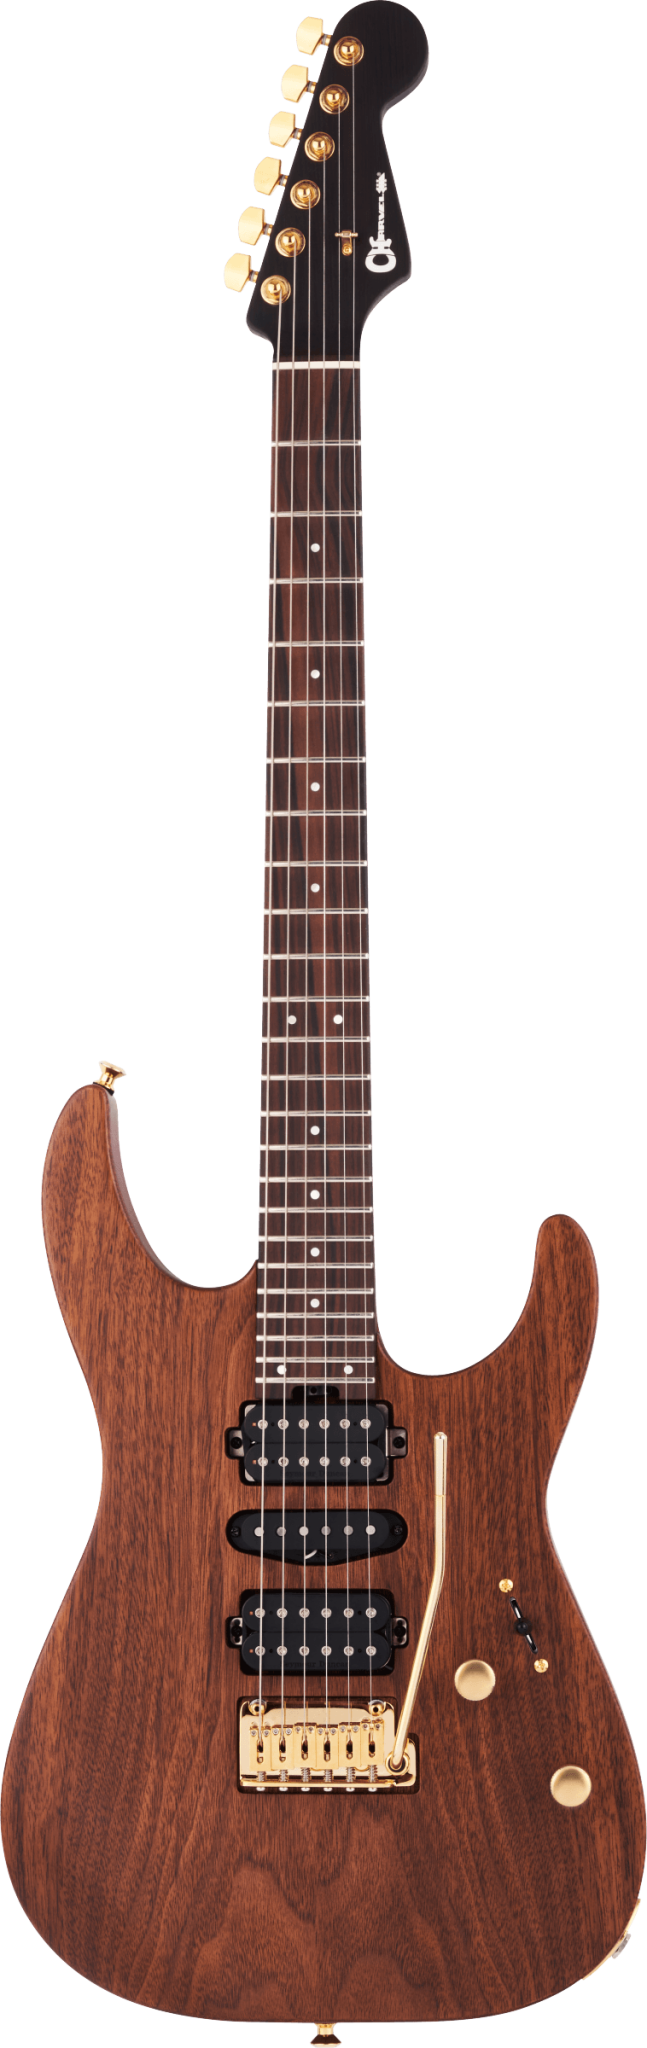 Charvel Charvel MJ DK24 HSH 2PT E Mahogany with Figured Walnut Natural Made In Japan